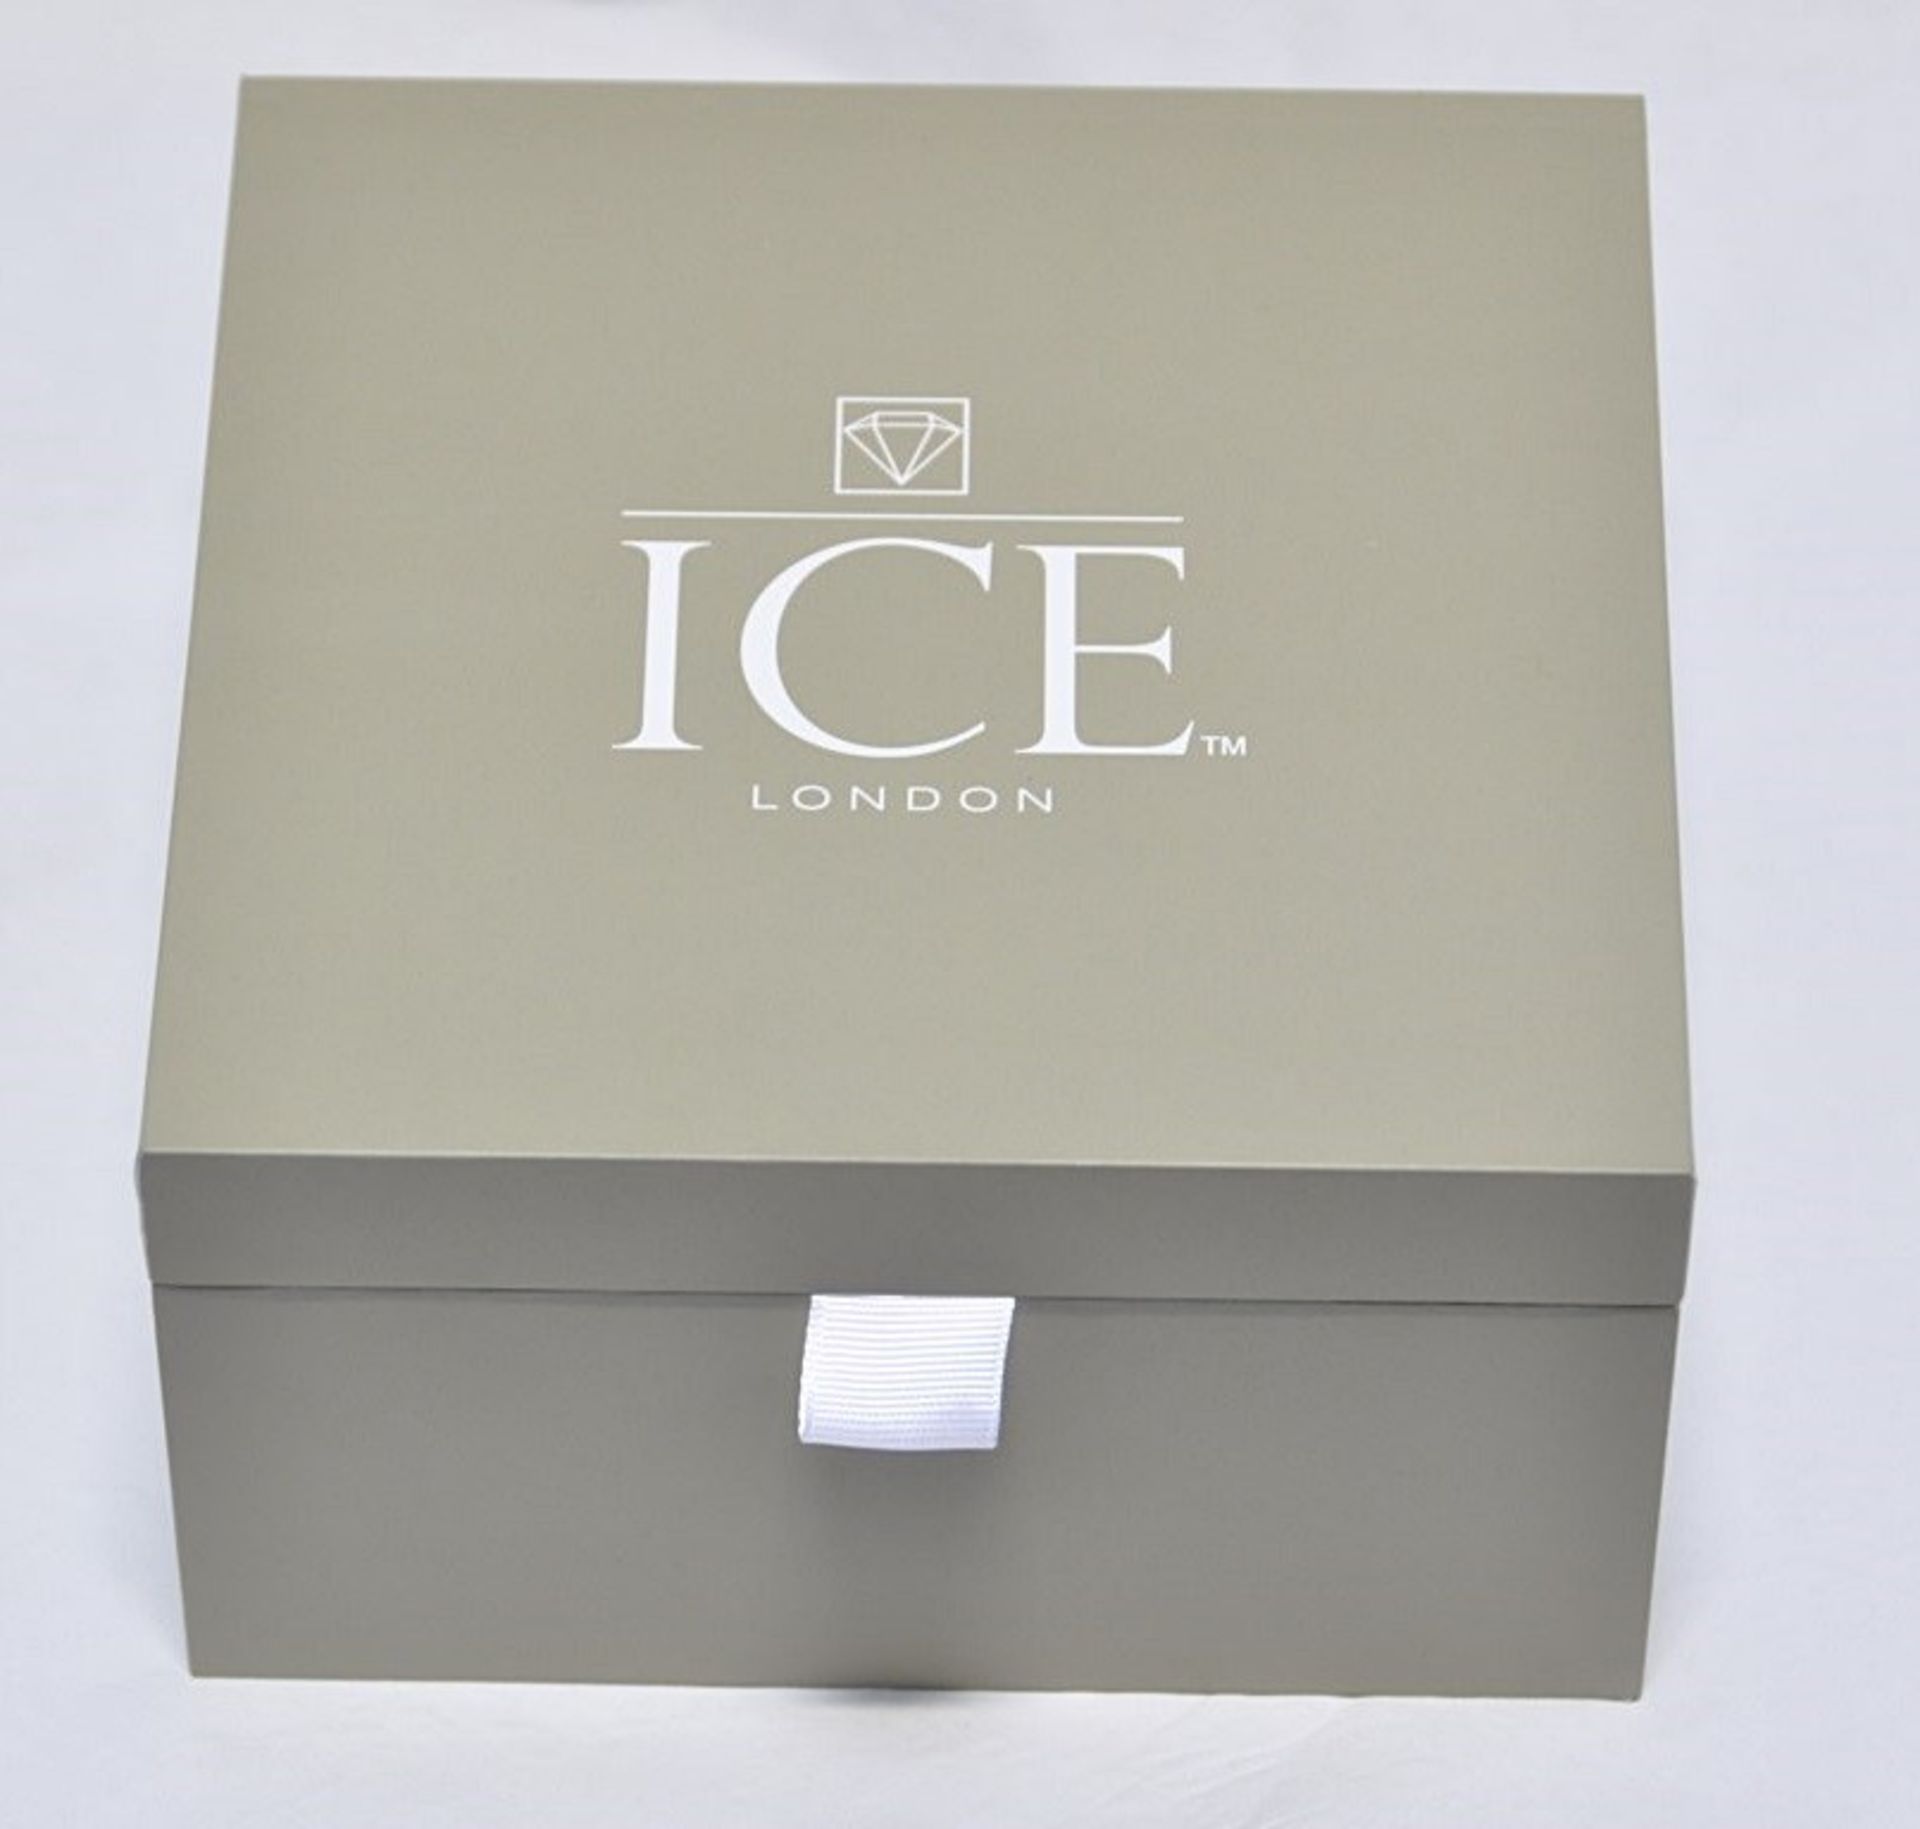 72 x Genuine Fine Leather Travel Card / Credit Card Holders by ICE London - EGW-6007-PK - Colour: - Image 5 of 6